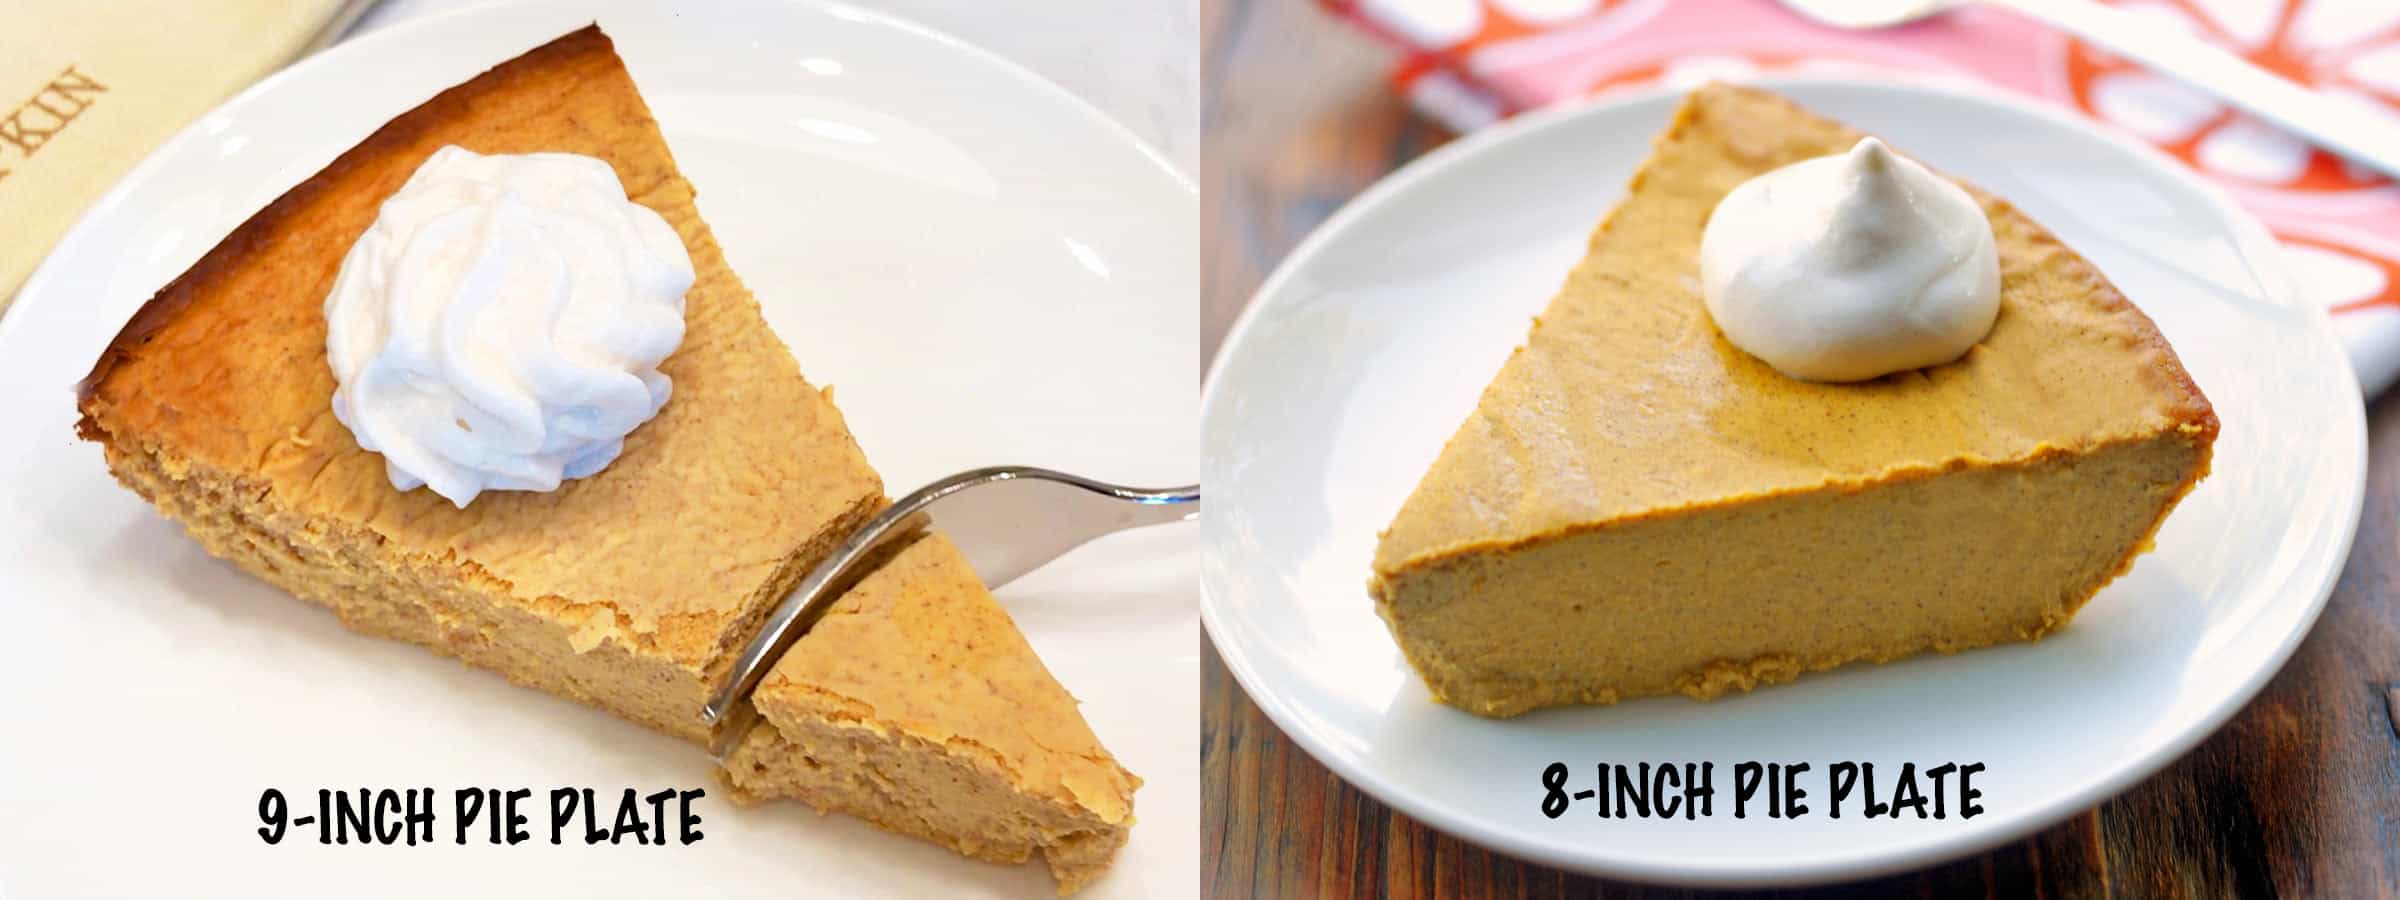 A two-photo collage showing the difference between a cake baked in a 9-inch pan and one baked in an 8-inch pan.